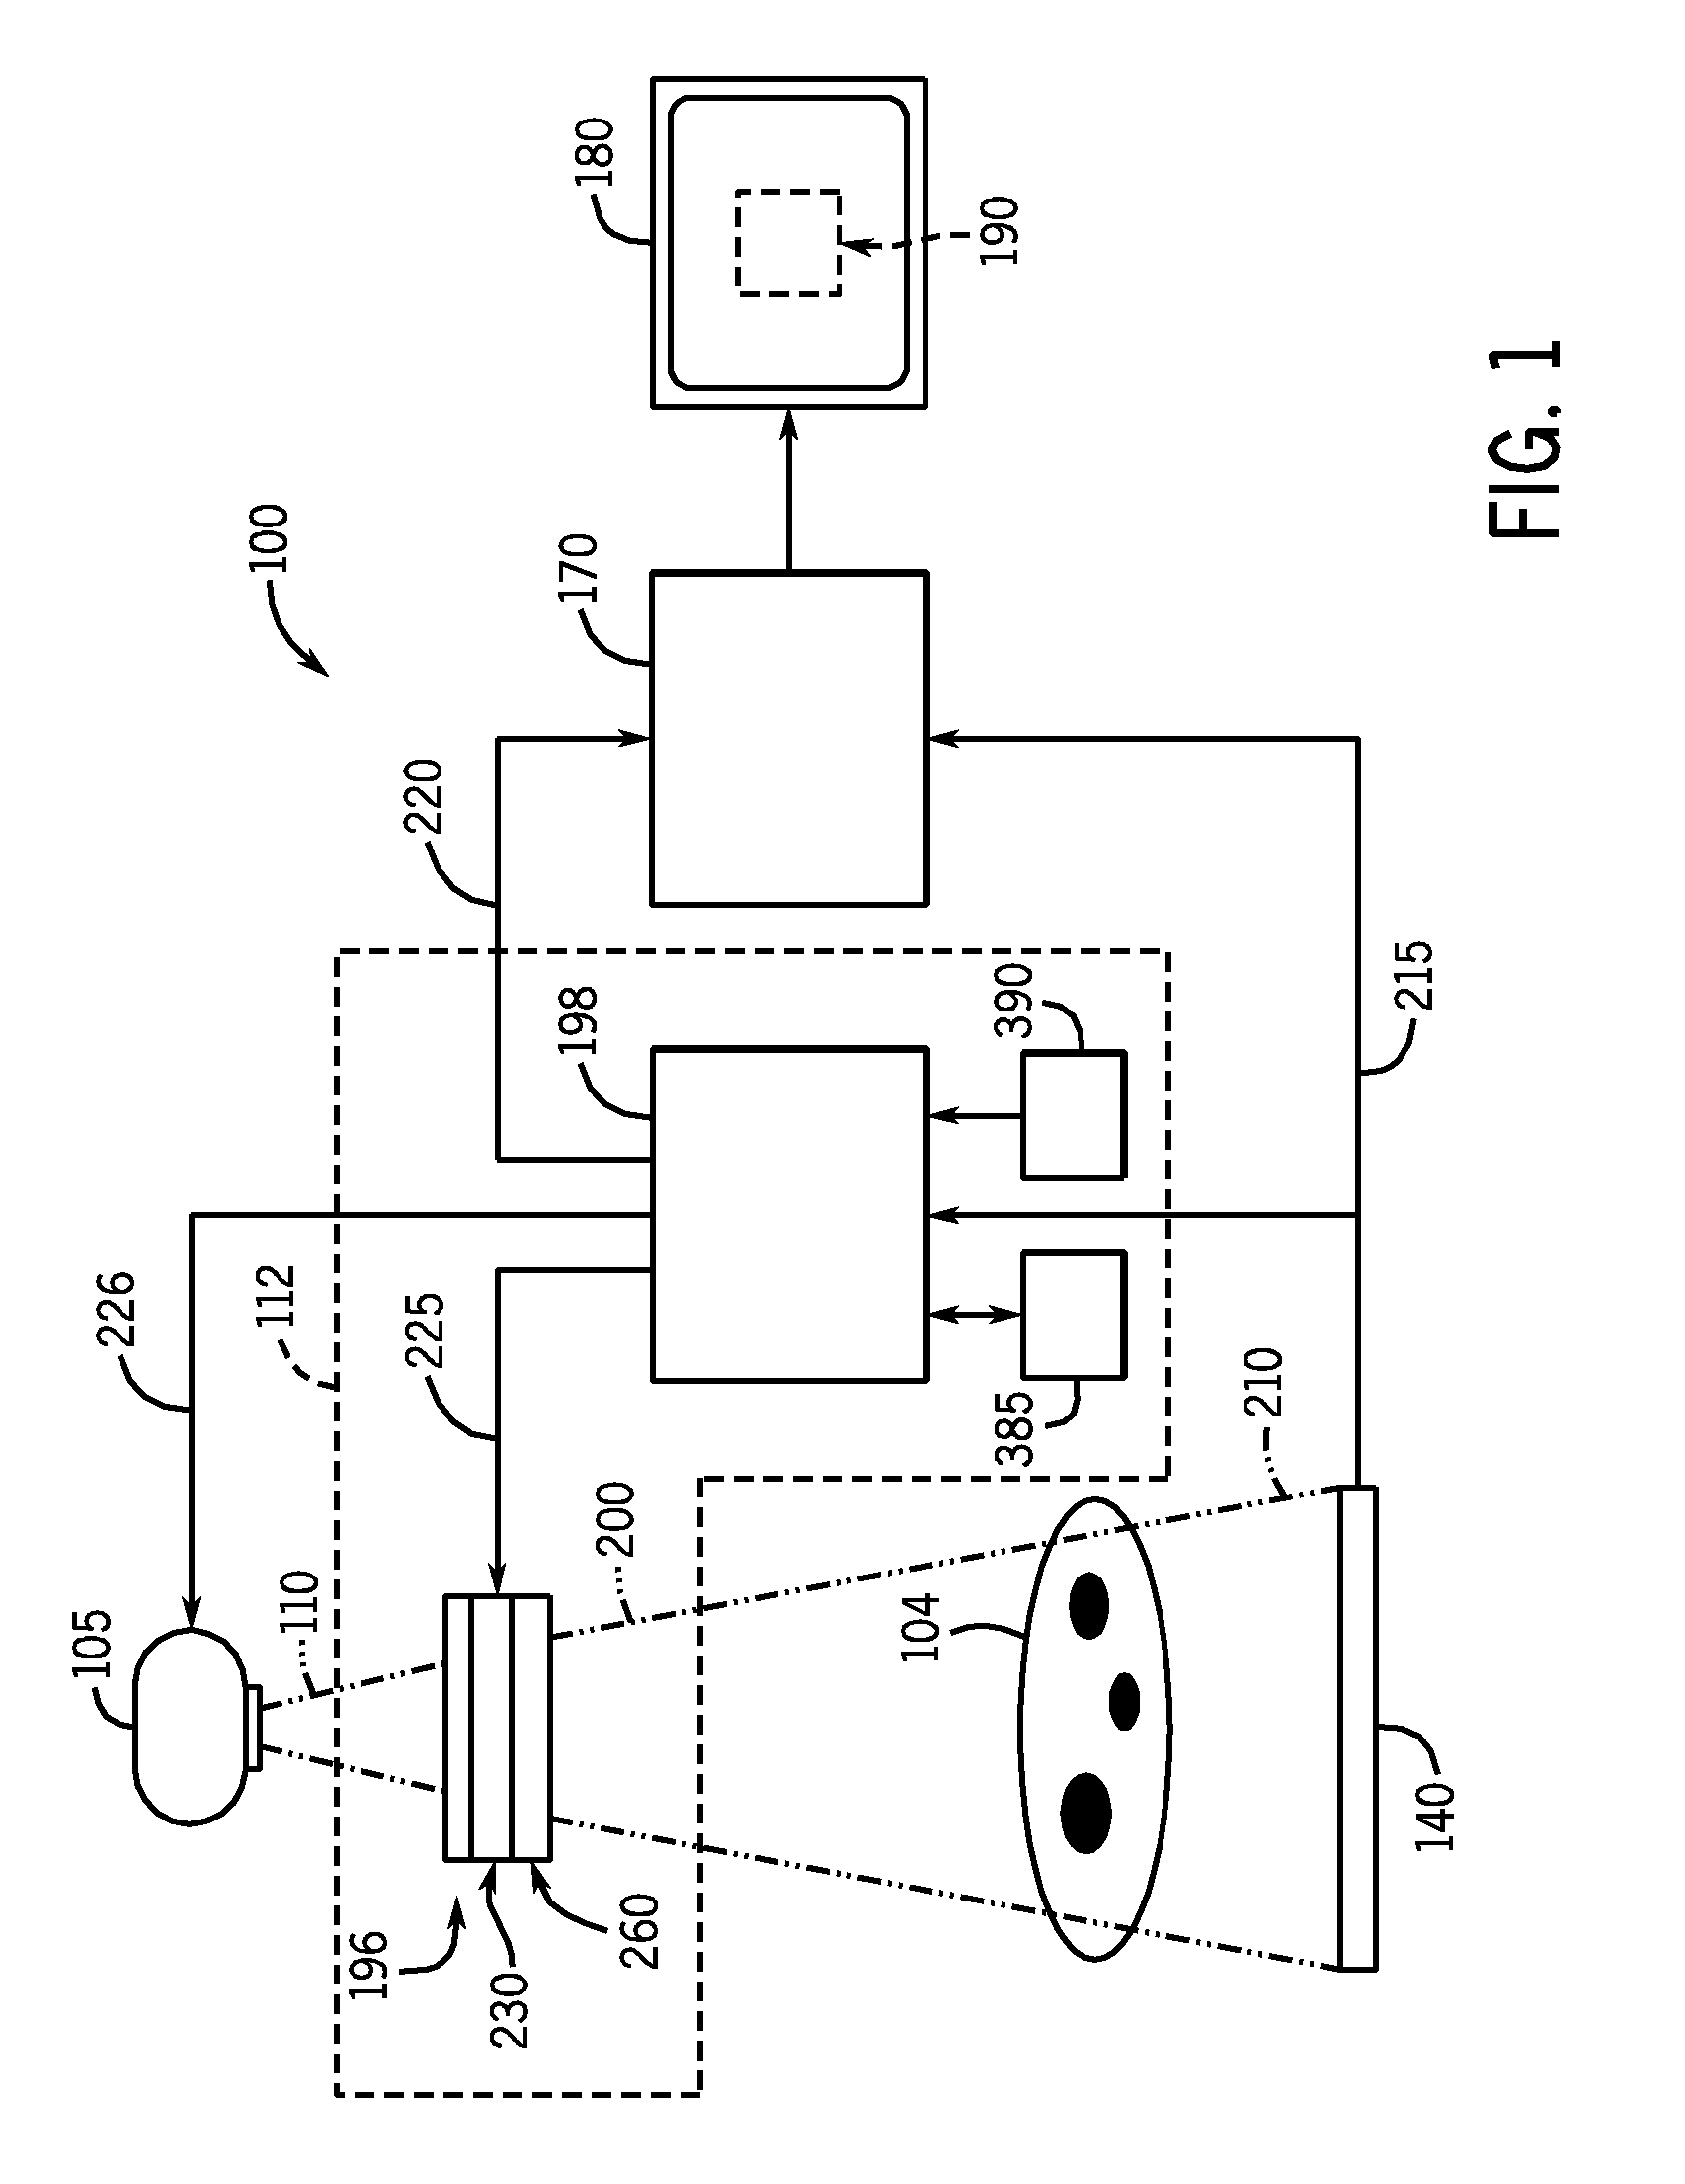 Method and system for controlling radiation intensity of an imaging system